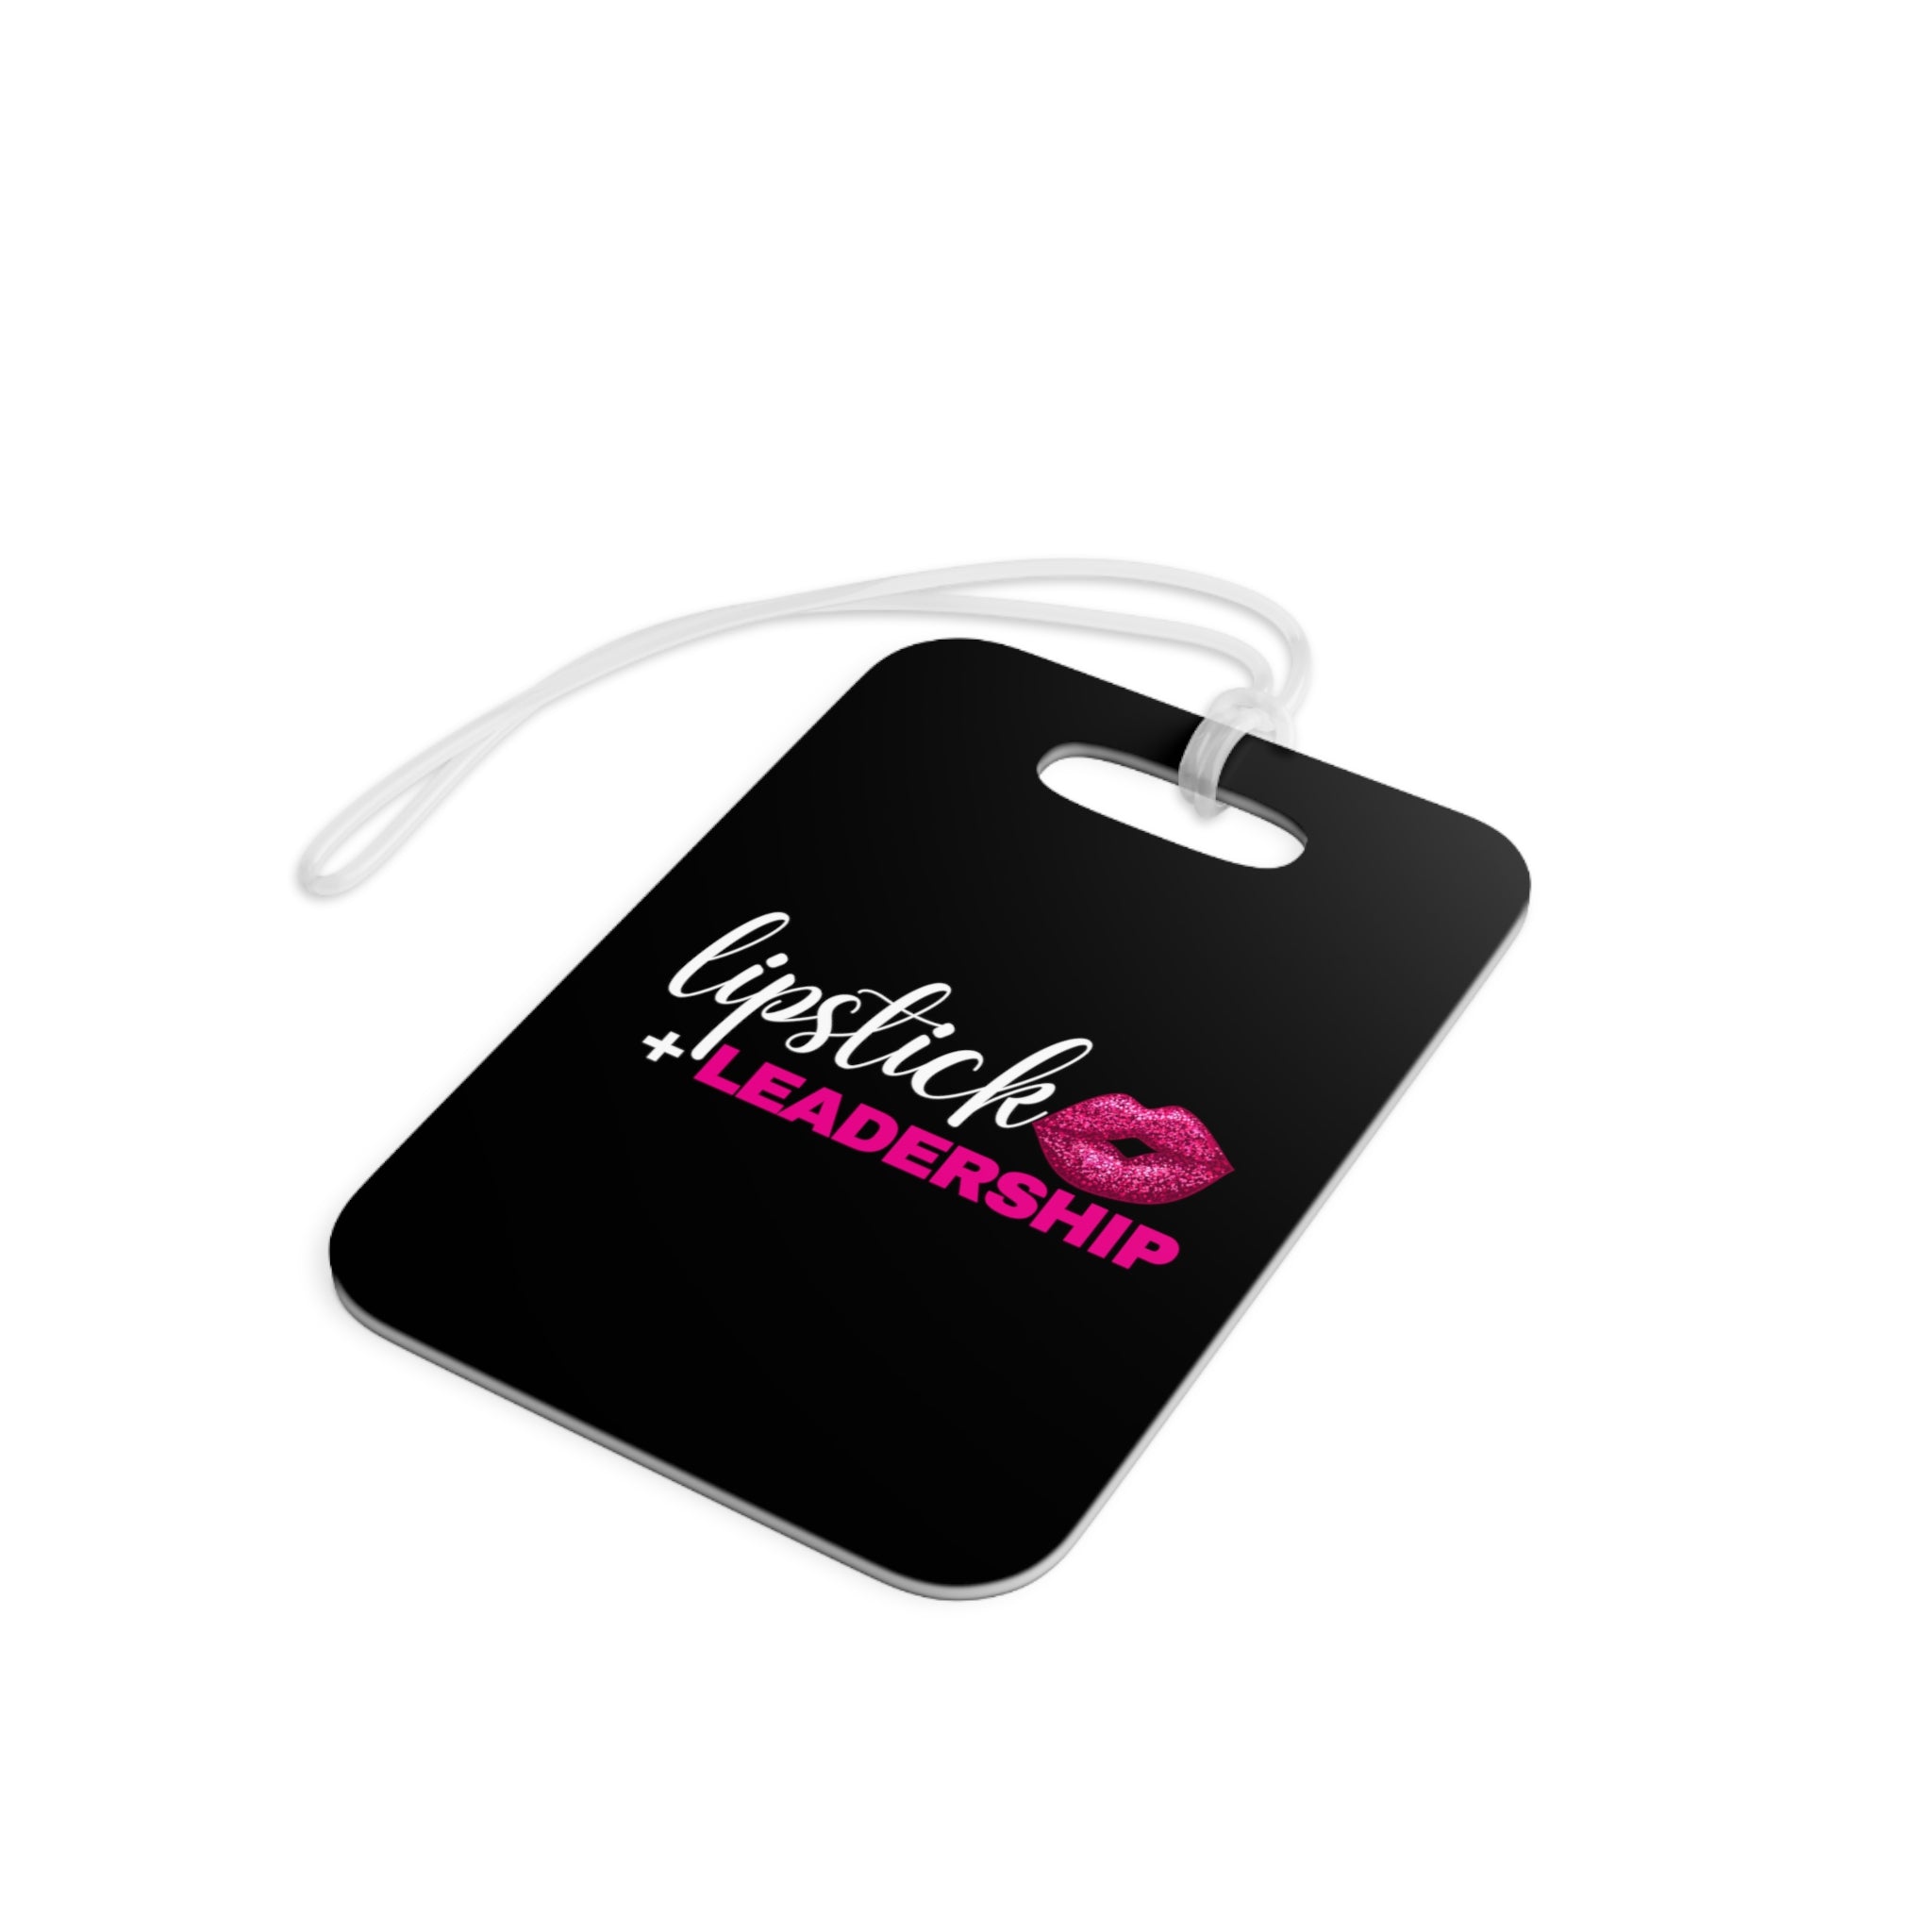 Lipstick + Leadership (Pink Sparkle Lips) Bag Tag, Makeup Lover Gift, Boss Babe Travel Tag Accessories  The Middle Aged Groove